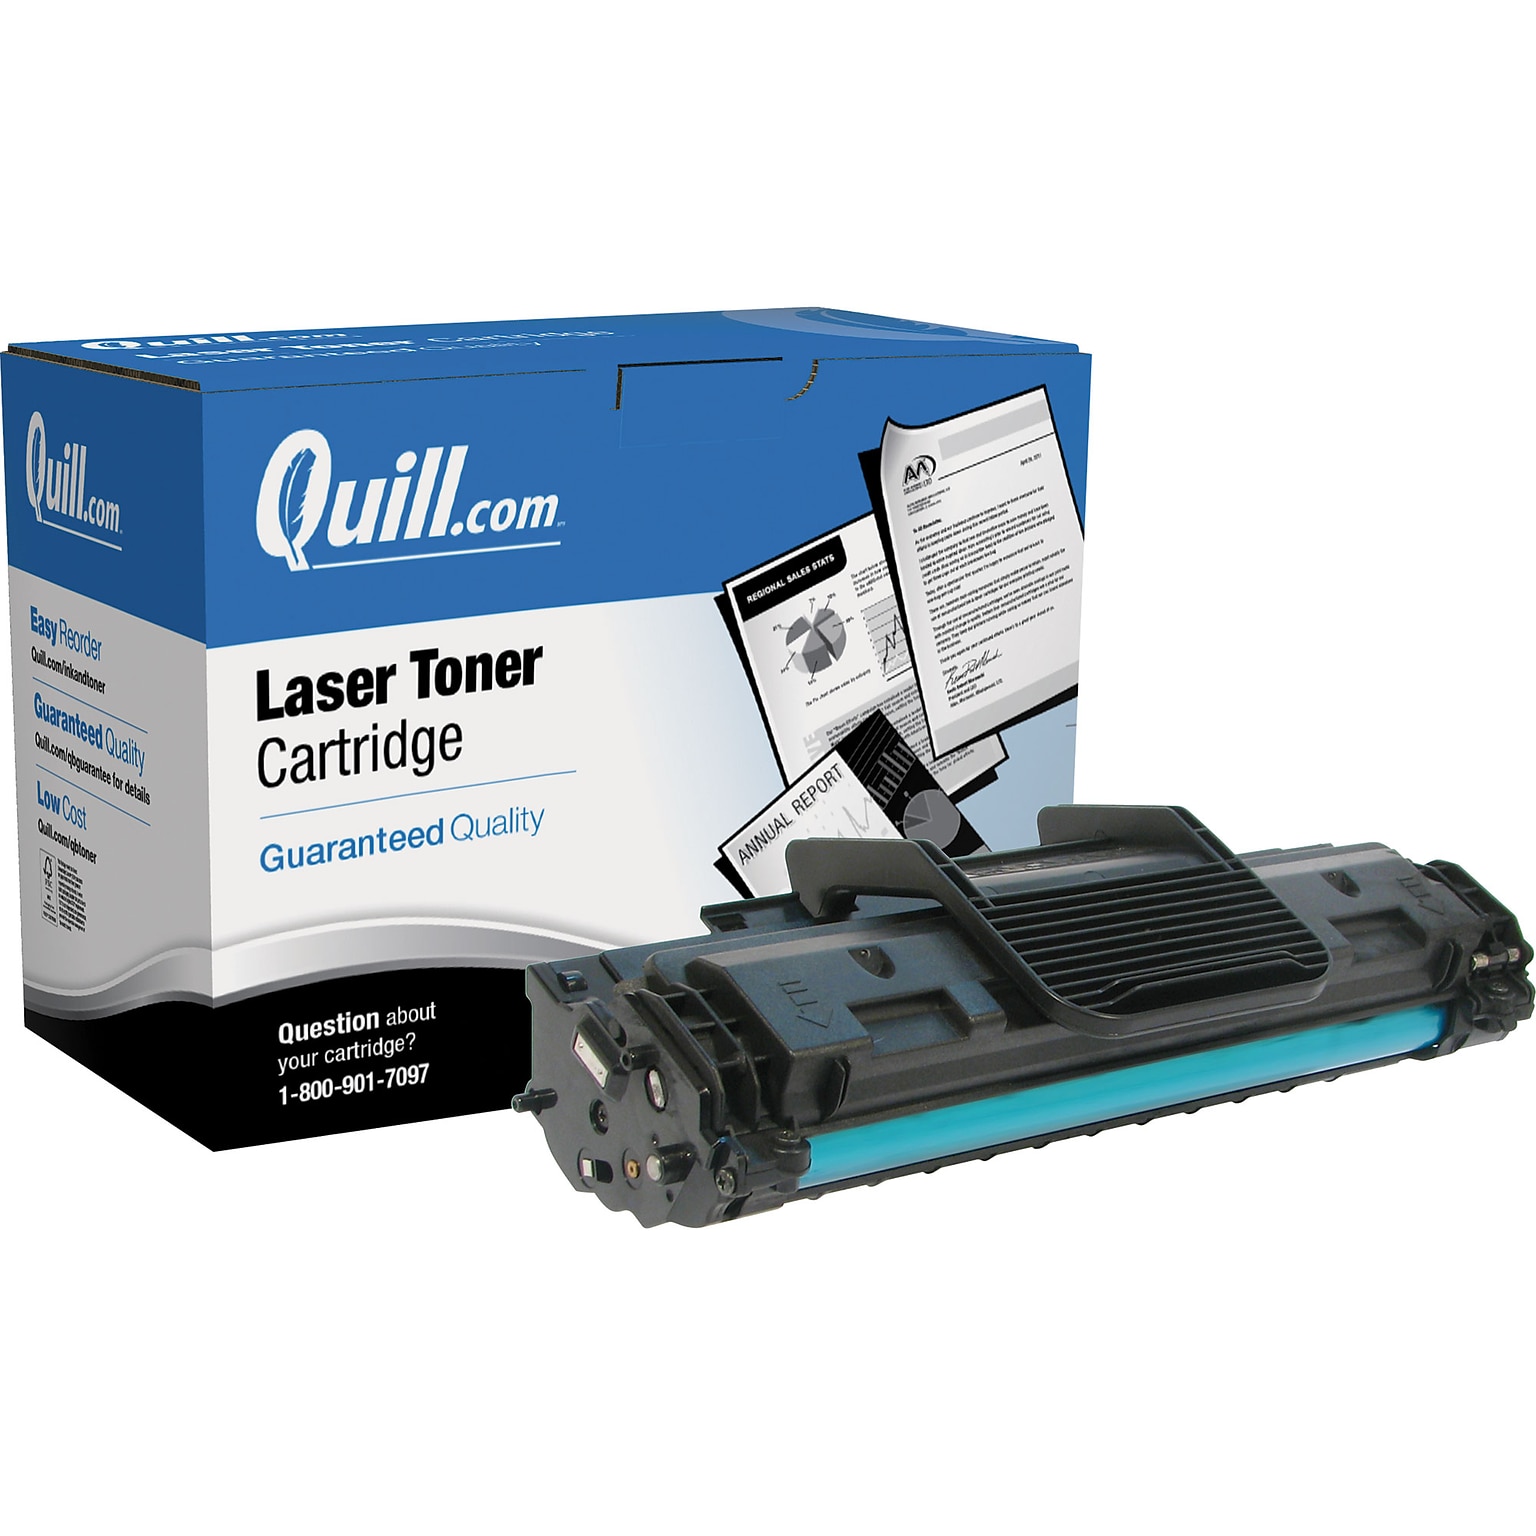 Quill Brandr Remanufactured Laser Toner Cartridge Compatible with Samsungr ML-2010 Black (100% Satisfaction Guaranteed)